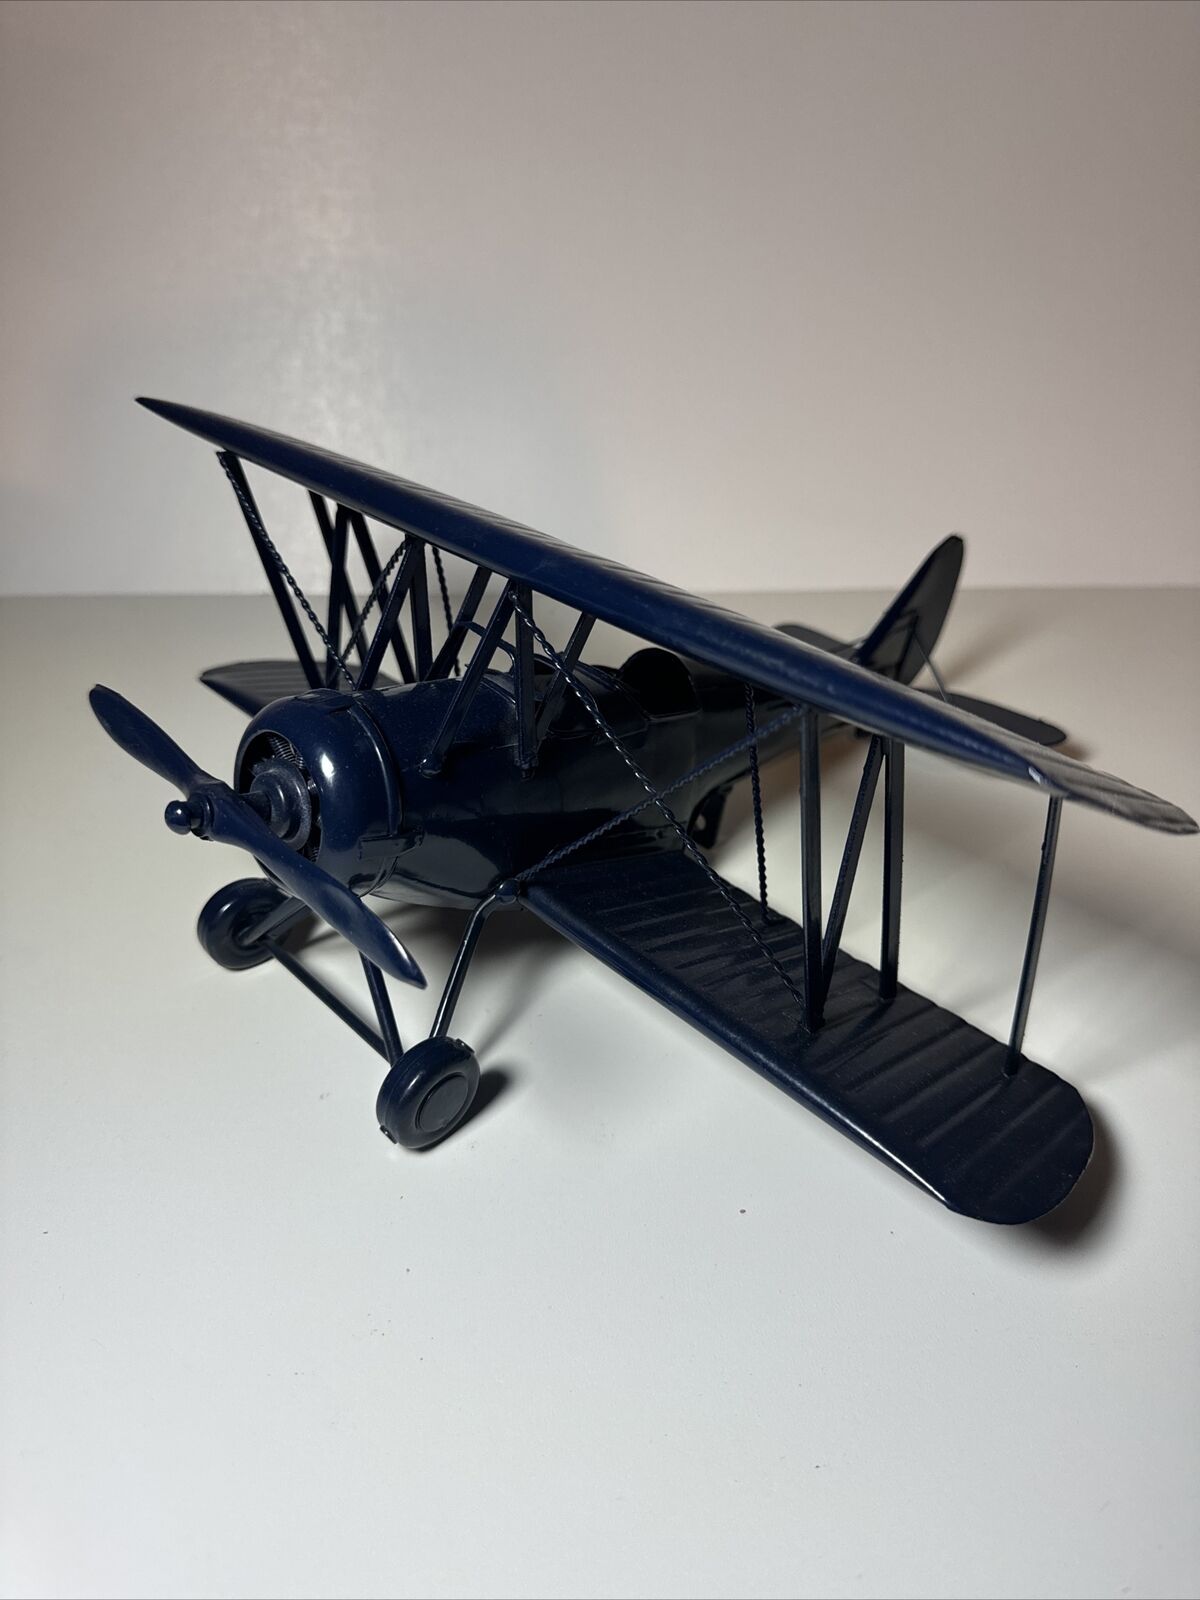 Metal Plane Aircraft Model Airplane Decor Kids Room (12inx12in)